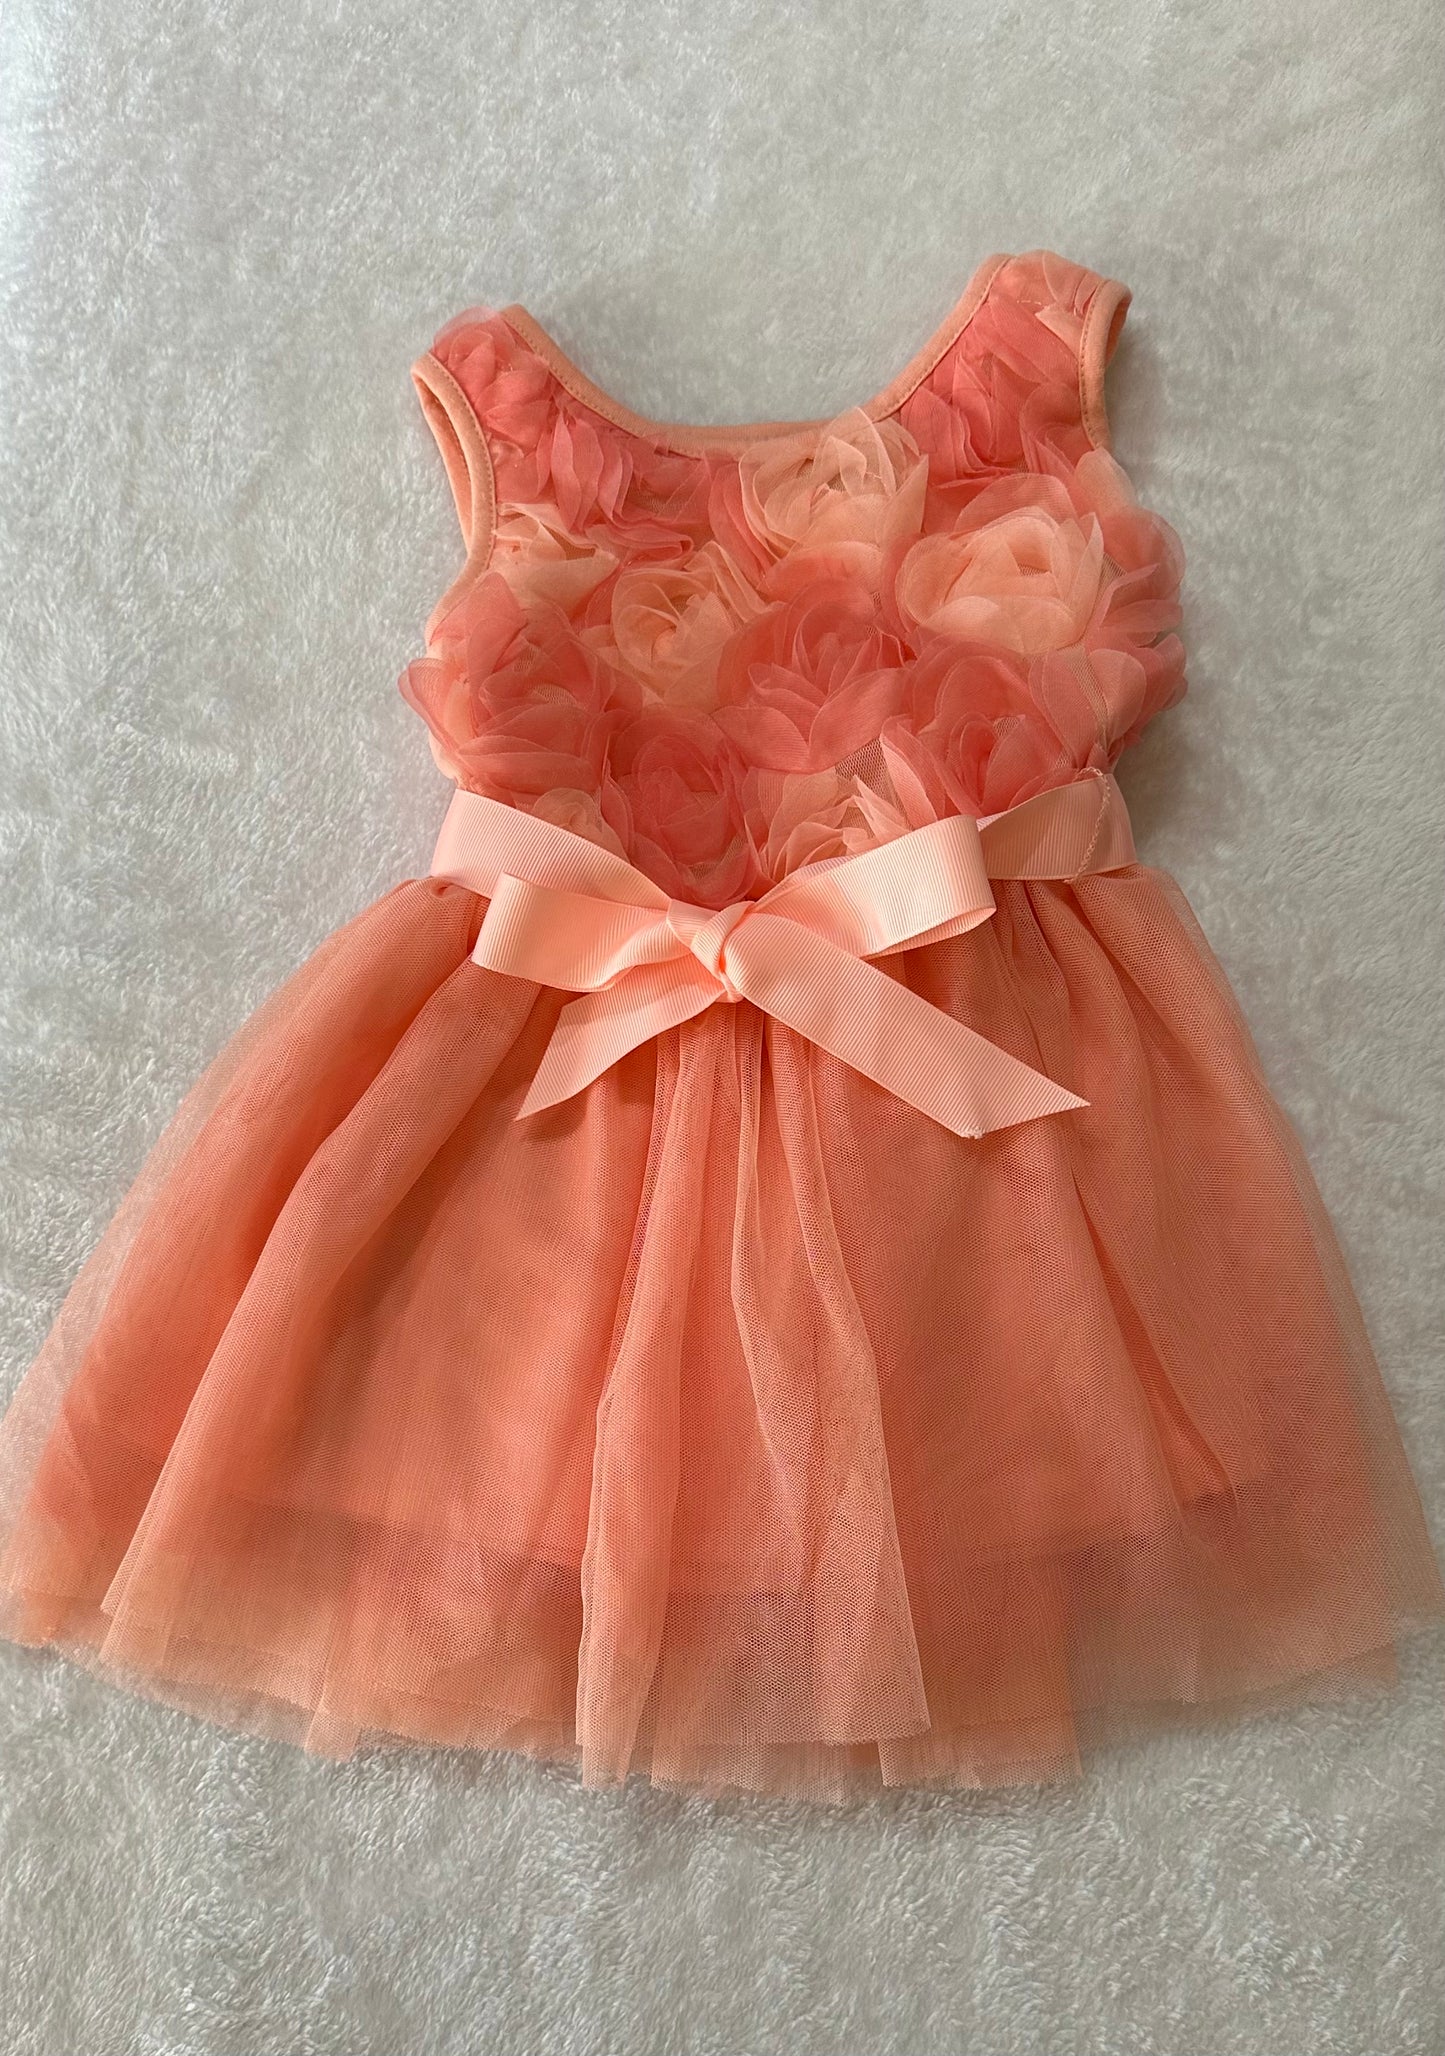 Girls 18-24 Months Childrens Place adorable dress